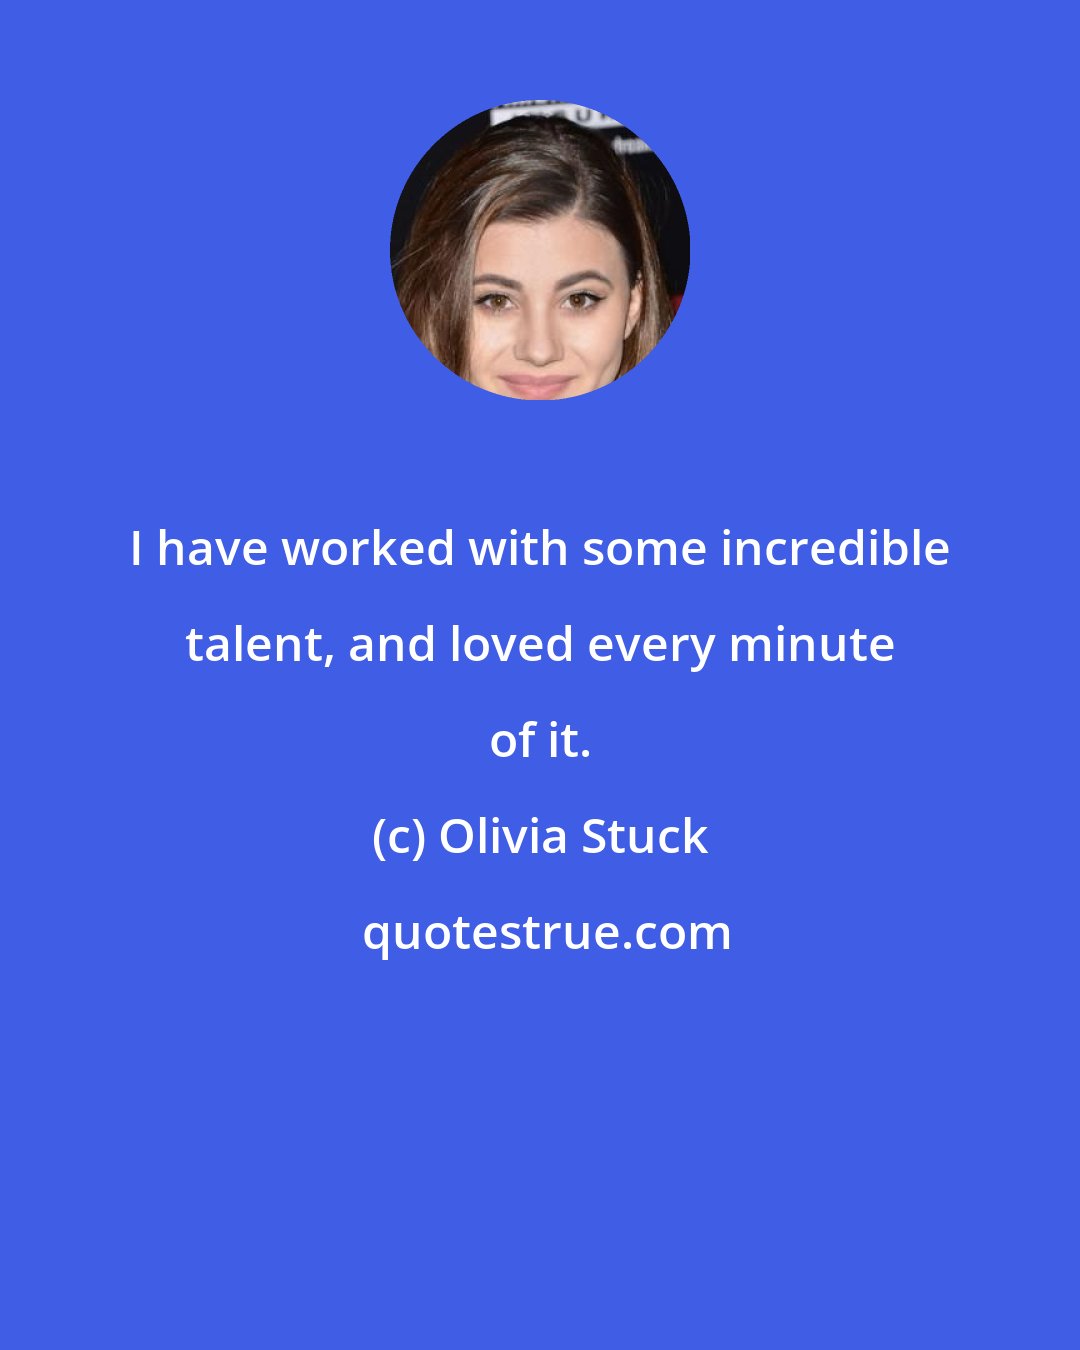 Olivia Stuck: I have worked with some incredible talent, and loved every minute of it.